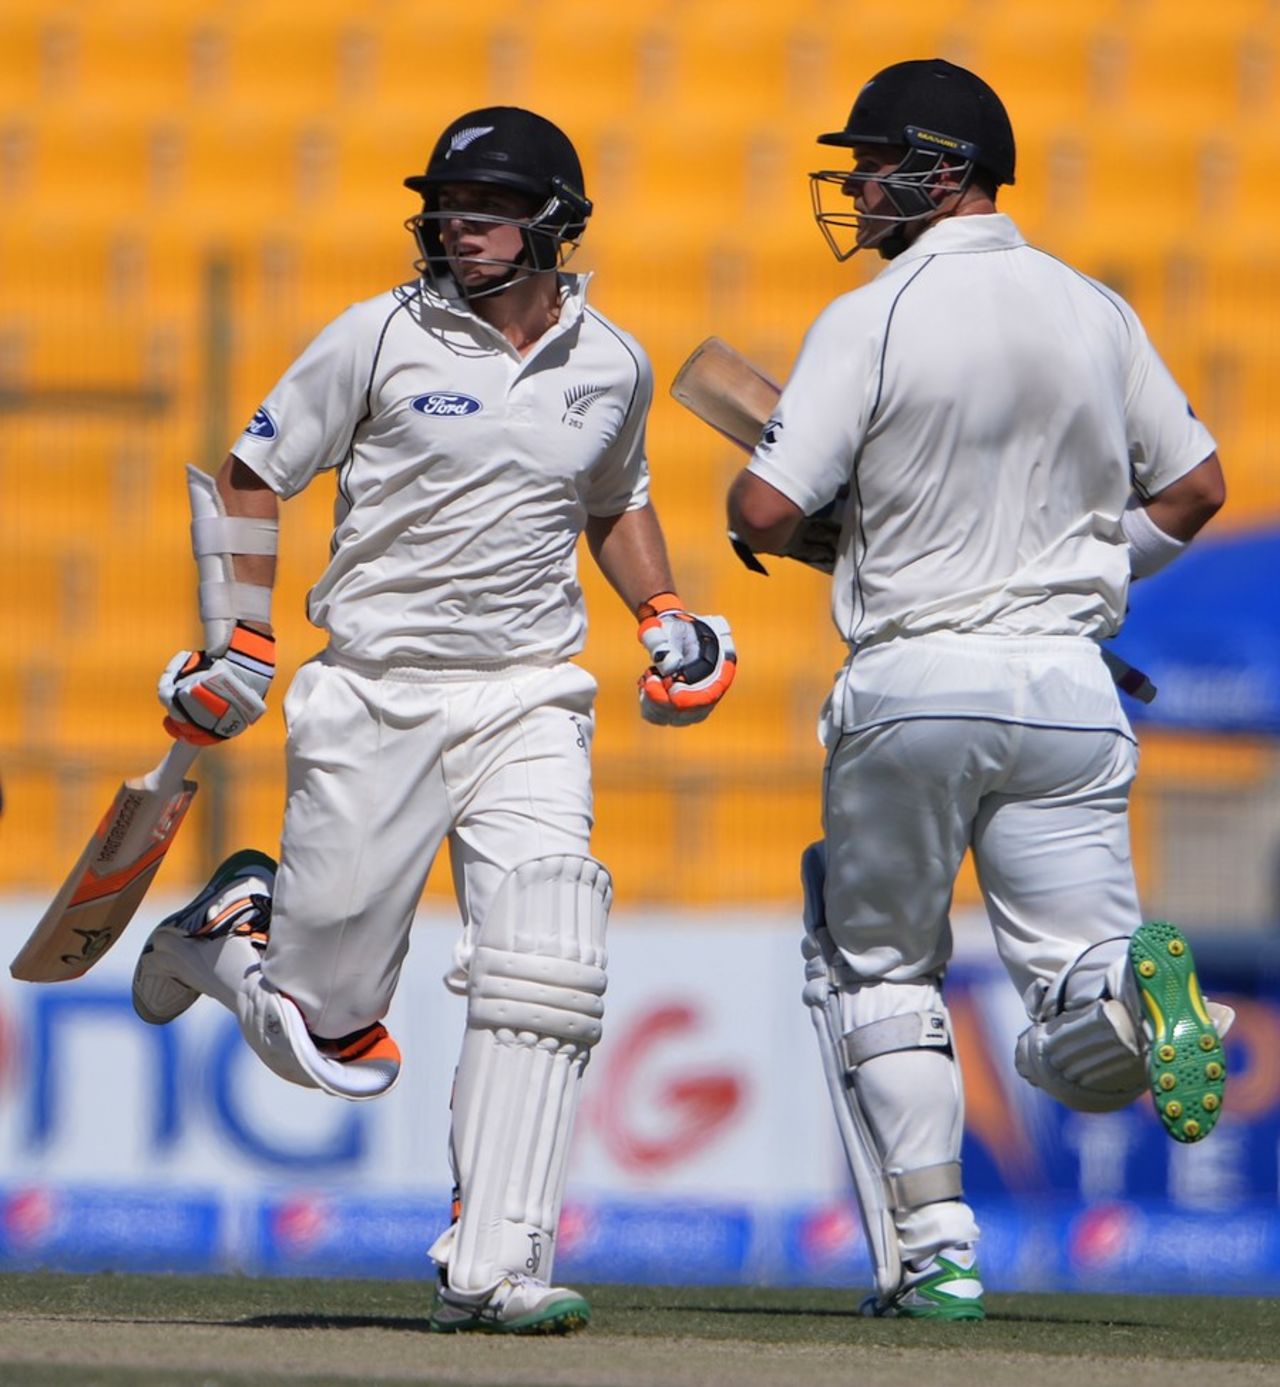 Tom Latham and Corey Anderson run between wickets, Pakistan v New Zealand, 1st Test, Abu Dhabi, 3rd day, November 11, 2014